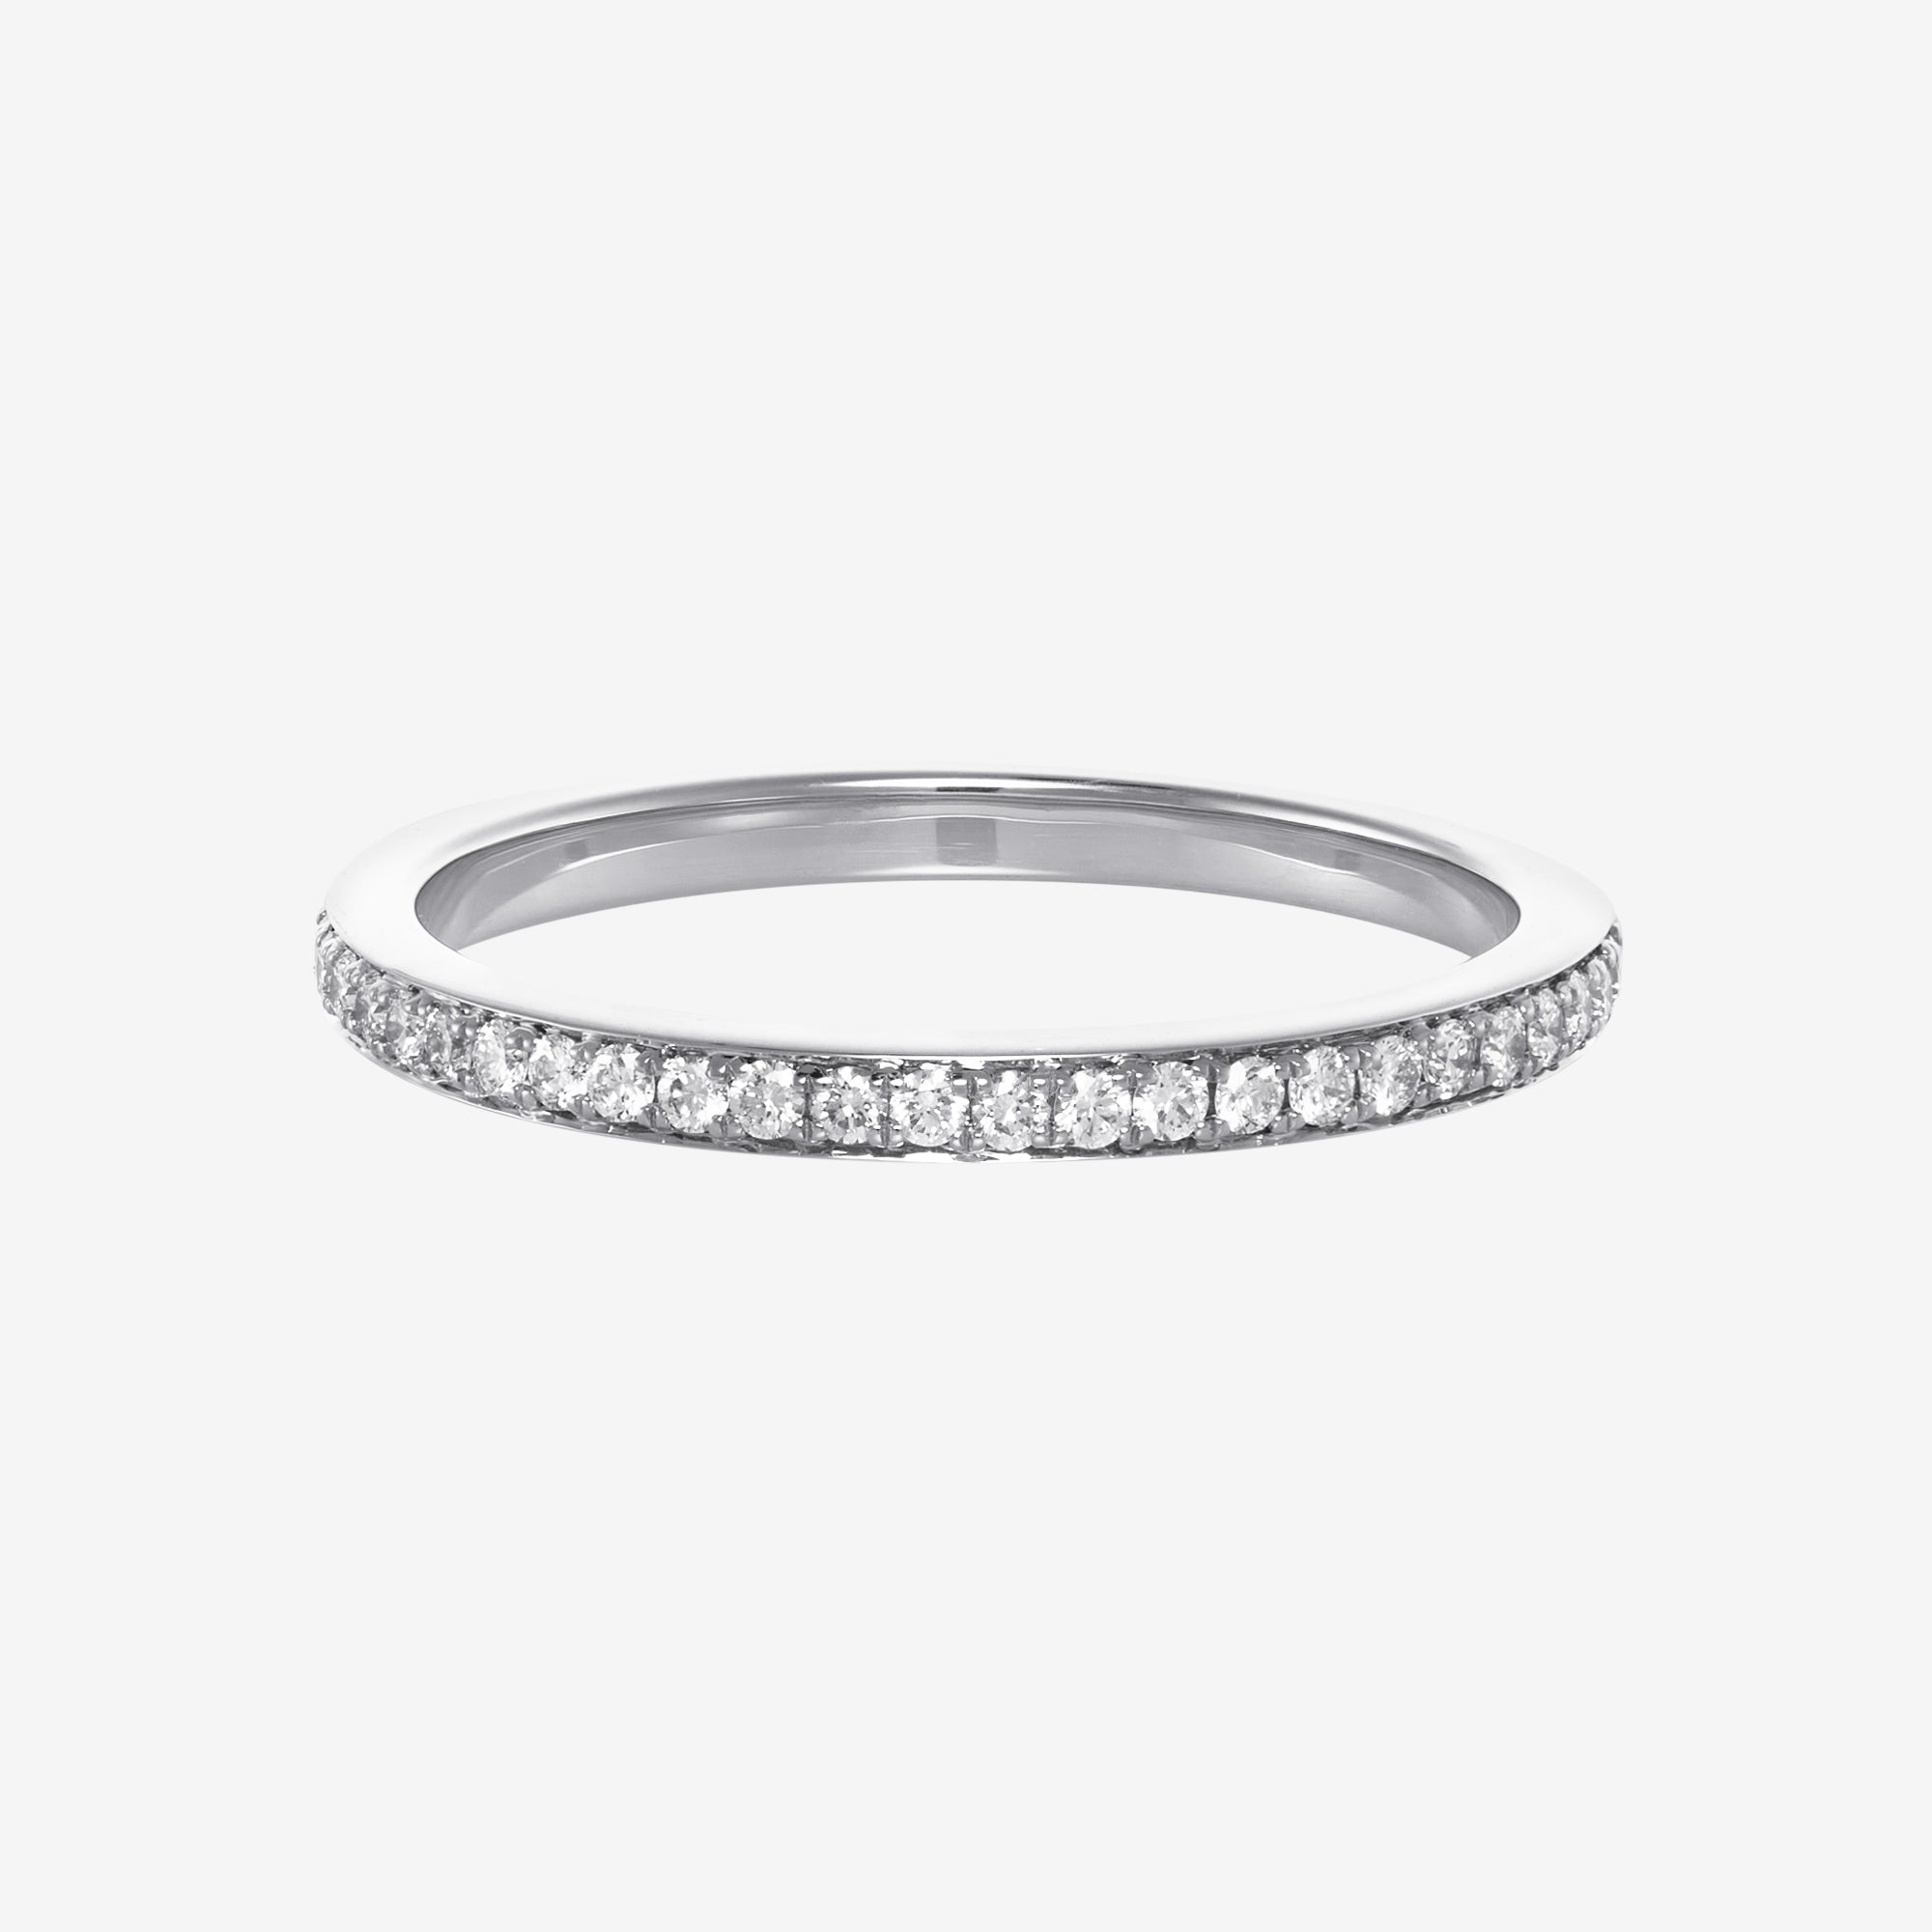 The One Pavé Ring